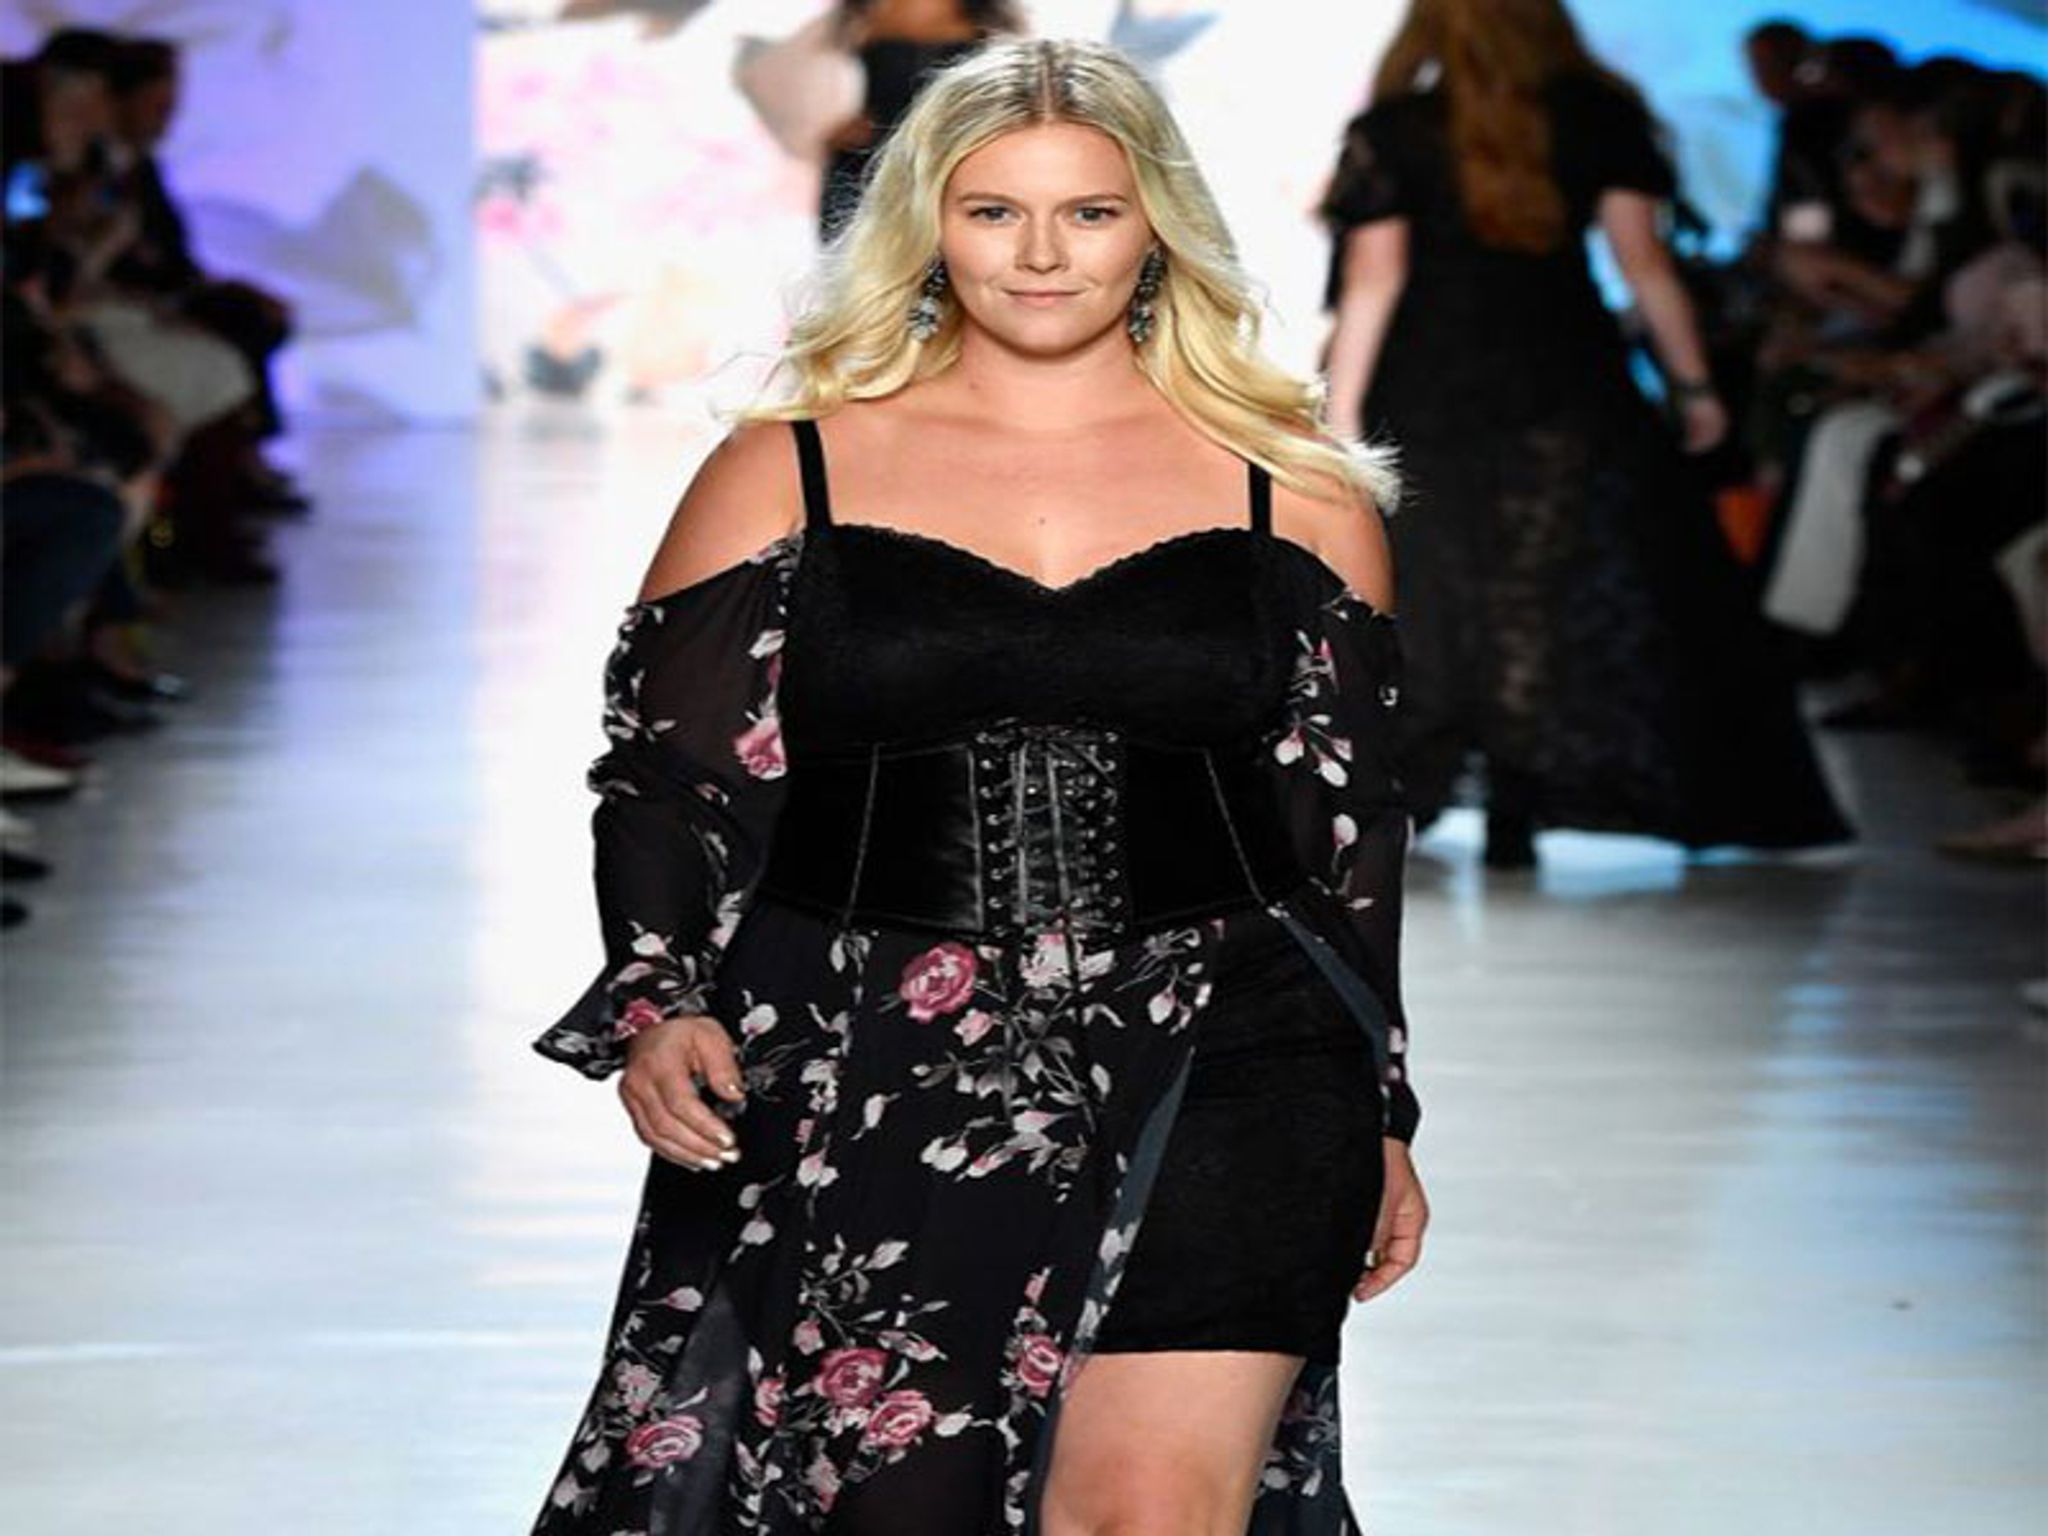 The First Plus Size Fashion Brand Showing at New York Fashion Week Impressed the World with another style